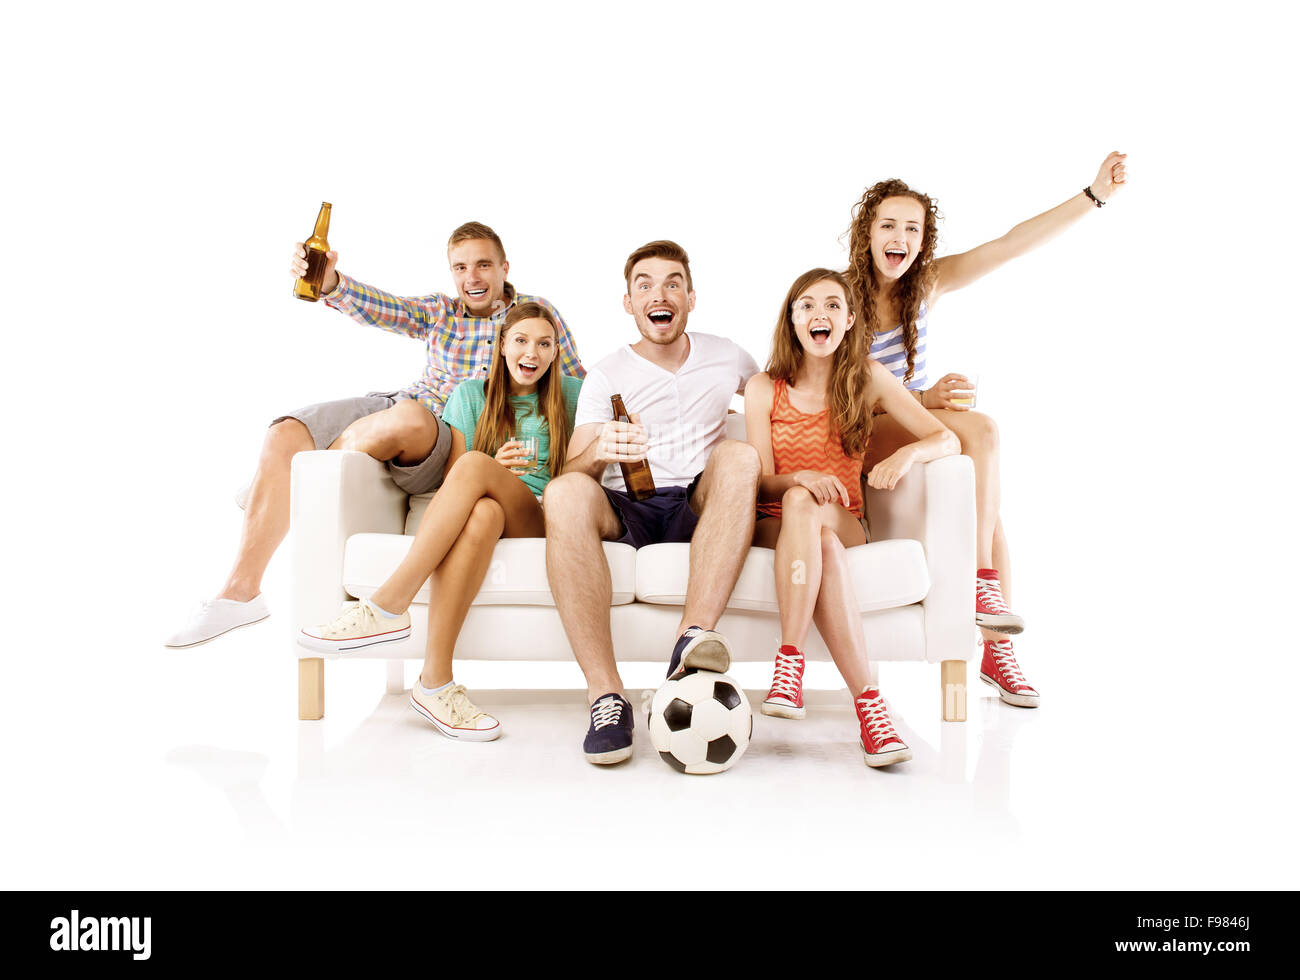 Group of happy young people sitting on sofa and holding soccer ball and bottled drinks, isolated on white background. Best frien Stock Photo